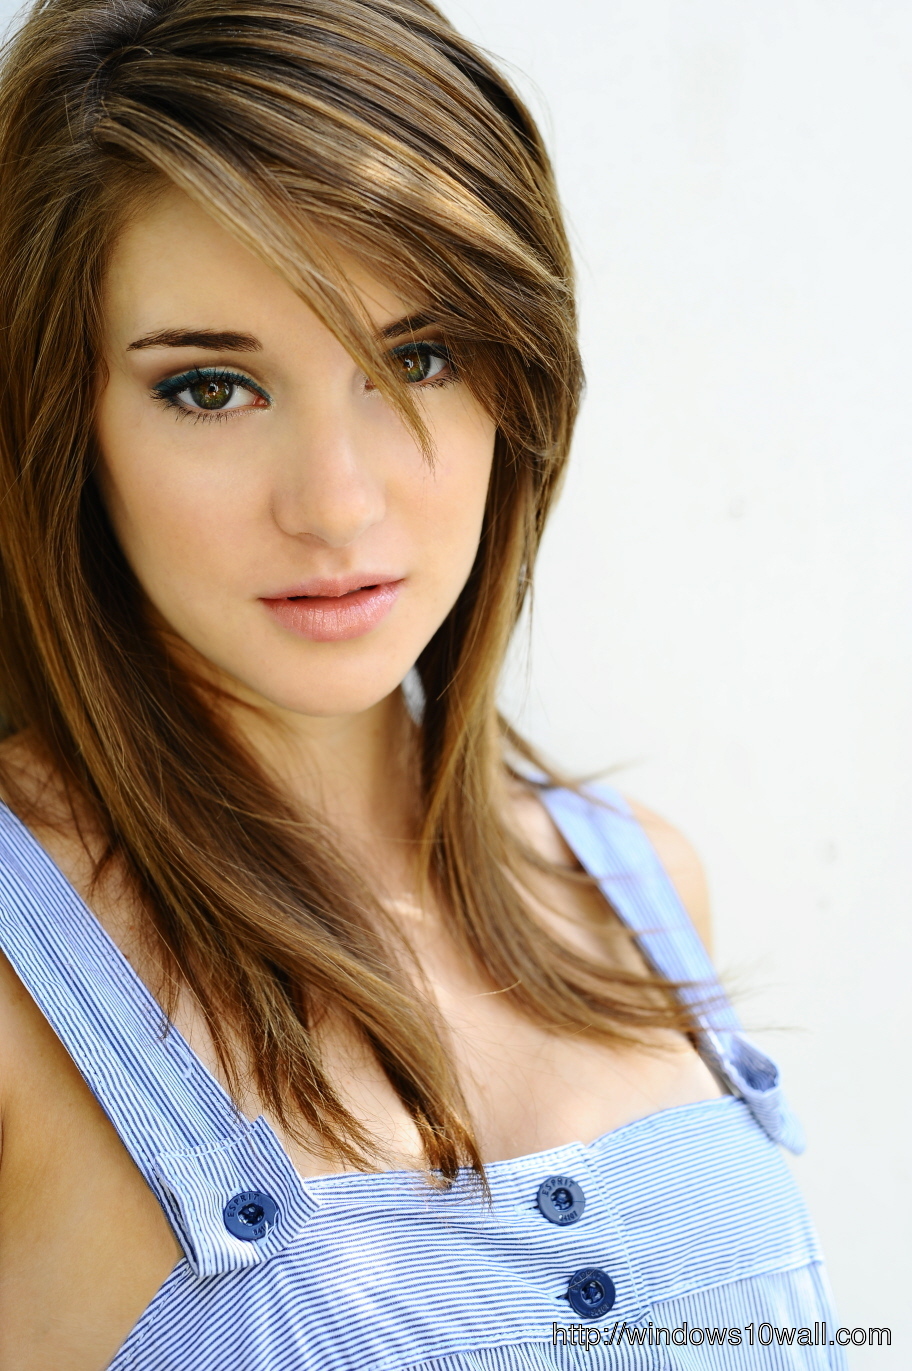 Shailene Woodley Mobile Picture